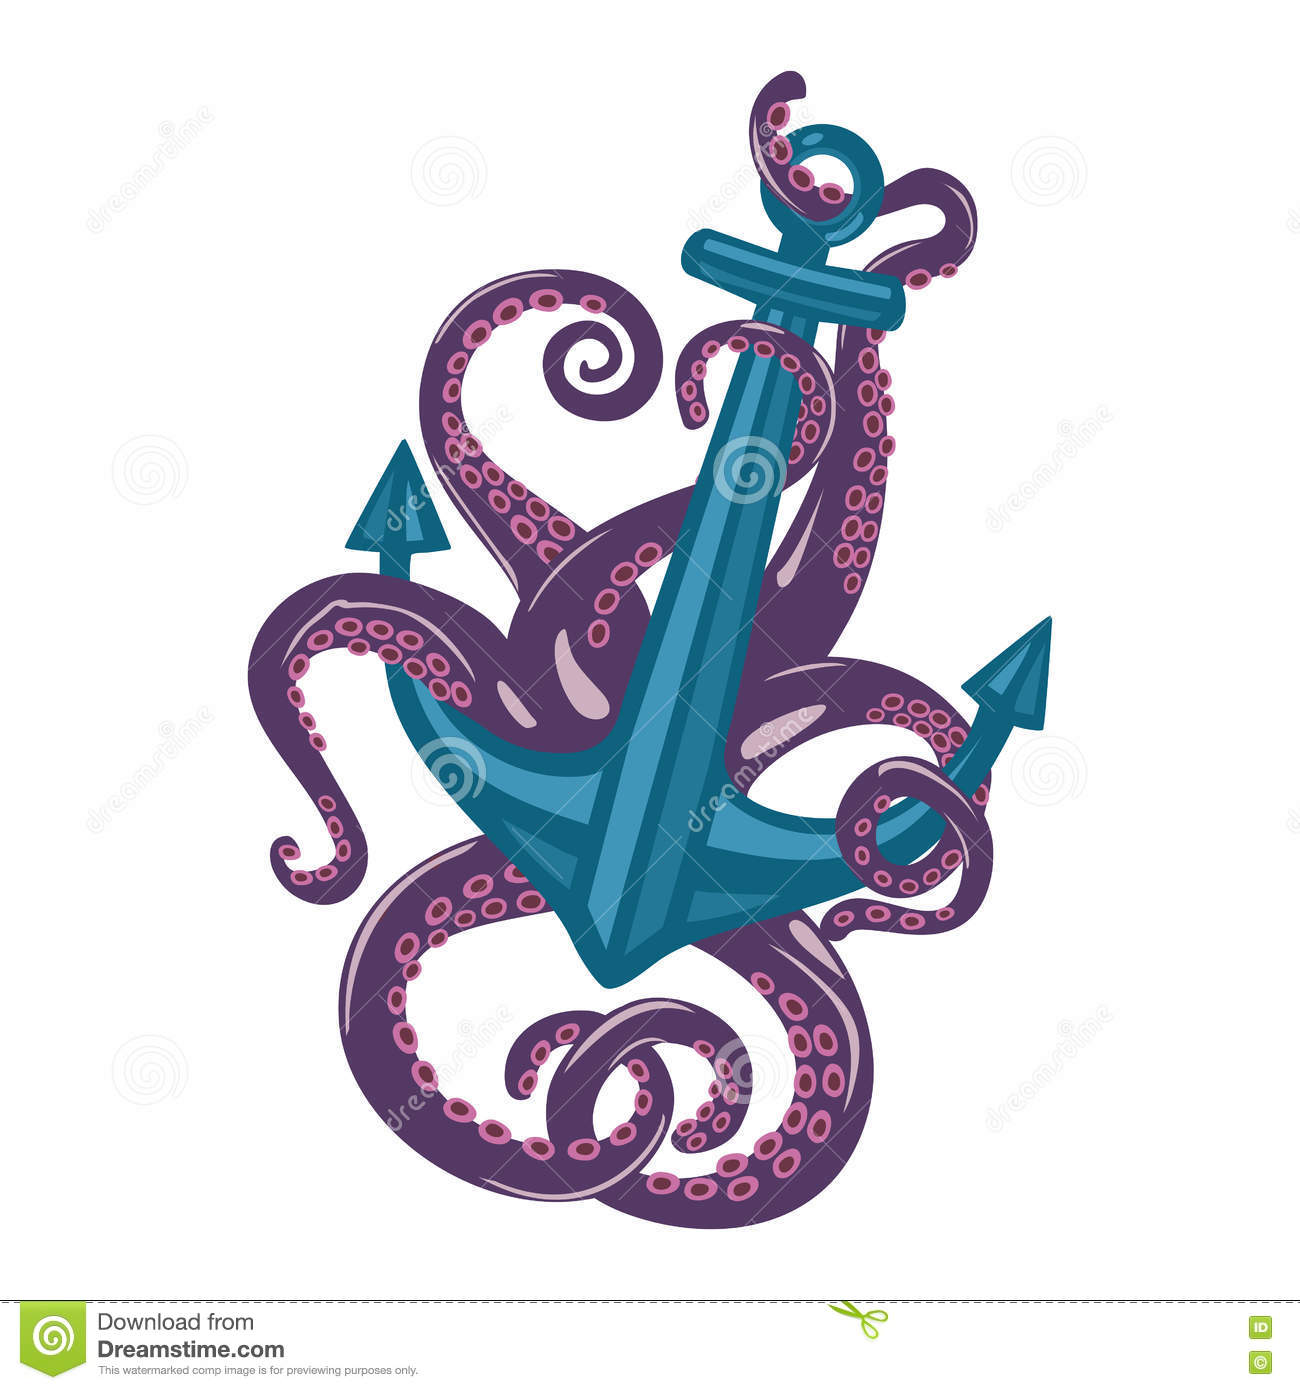 Violet Cartoon Octopus With Curvy Arms And Suction Cups Around Sea.